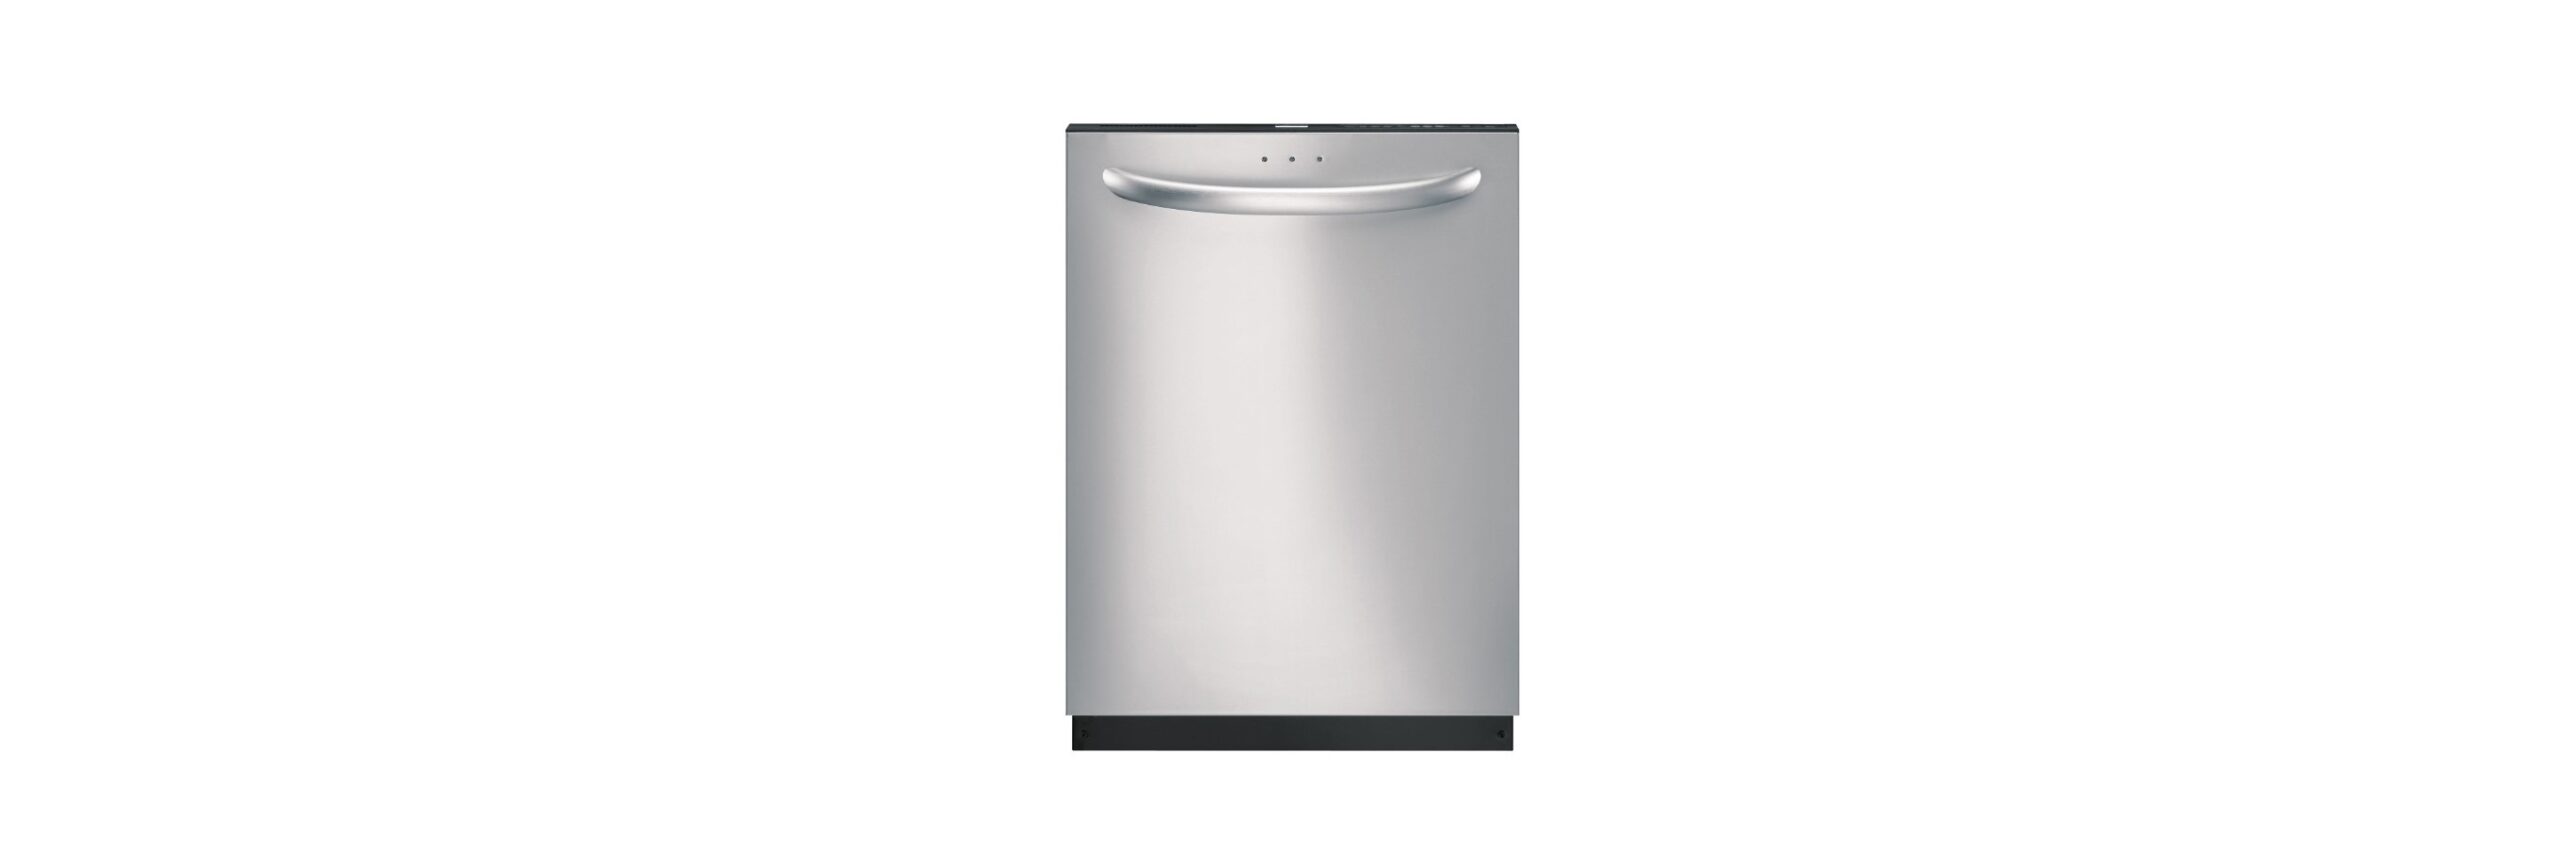 Kenmore ULTRA WASH Dishwasher Featured